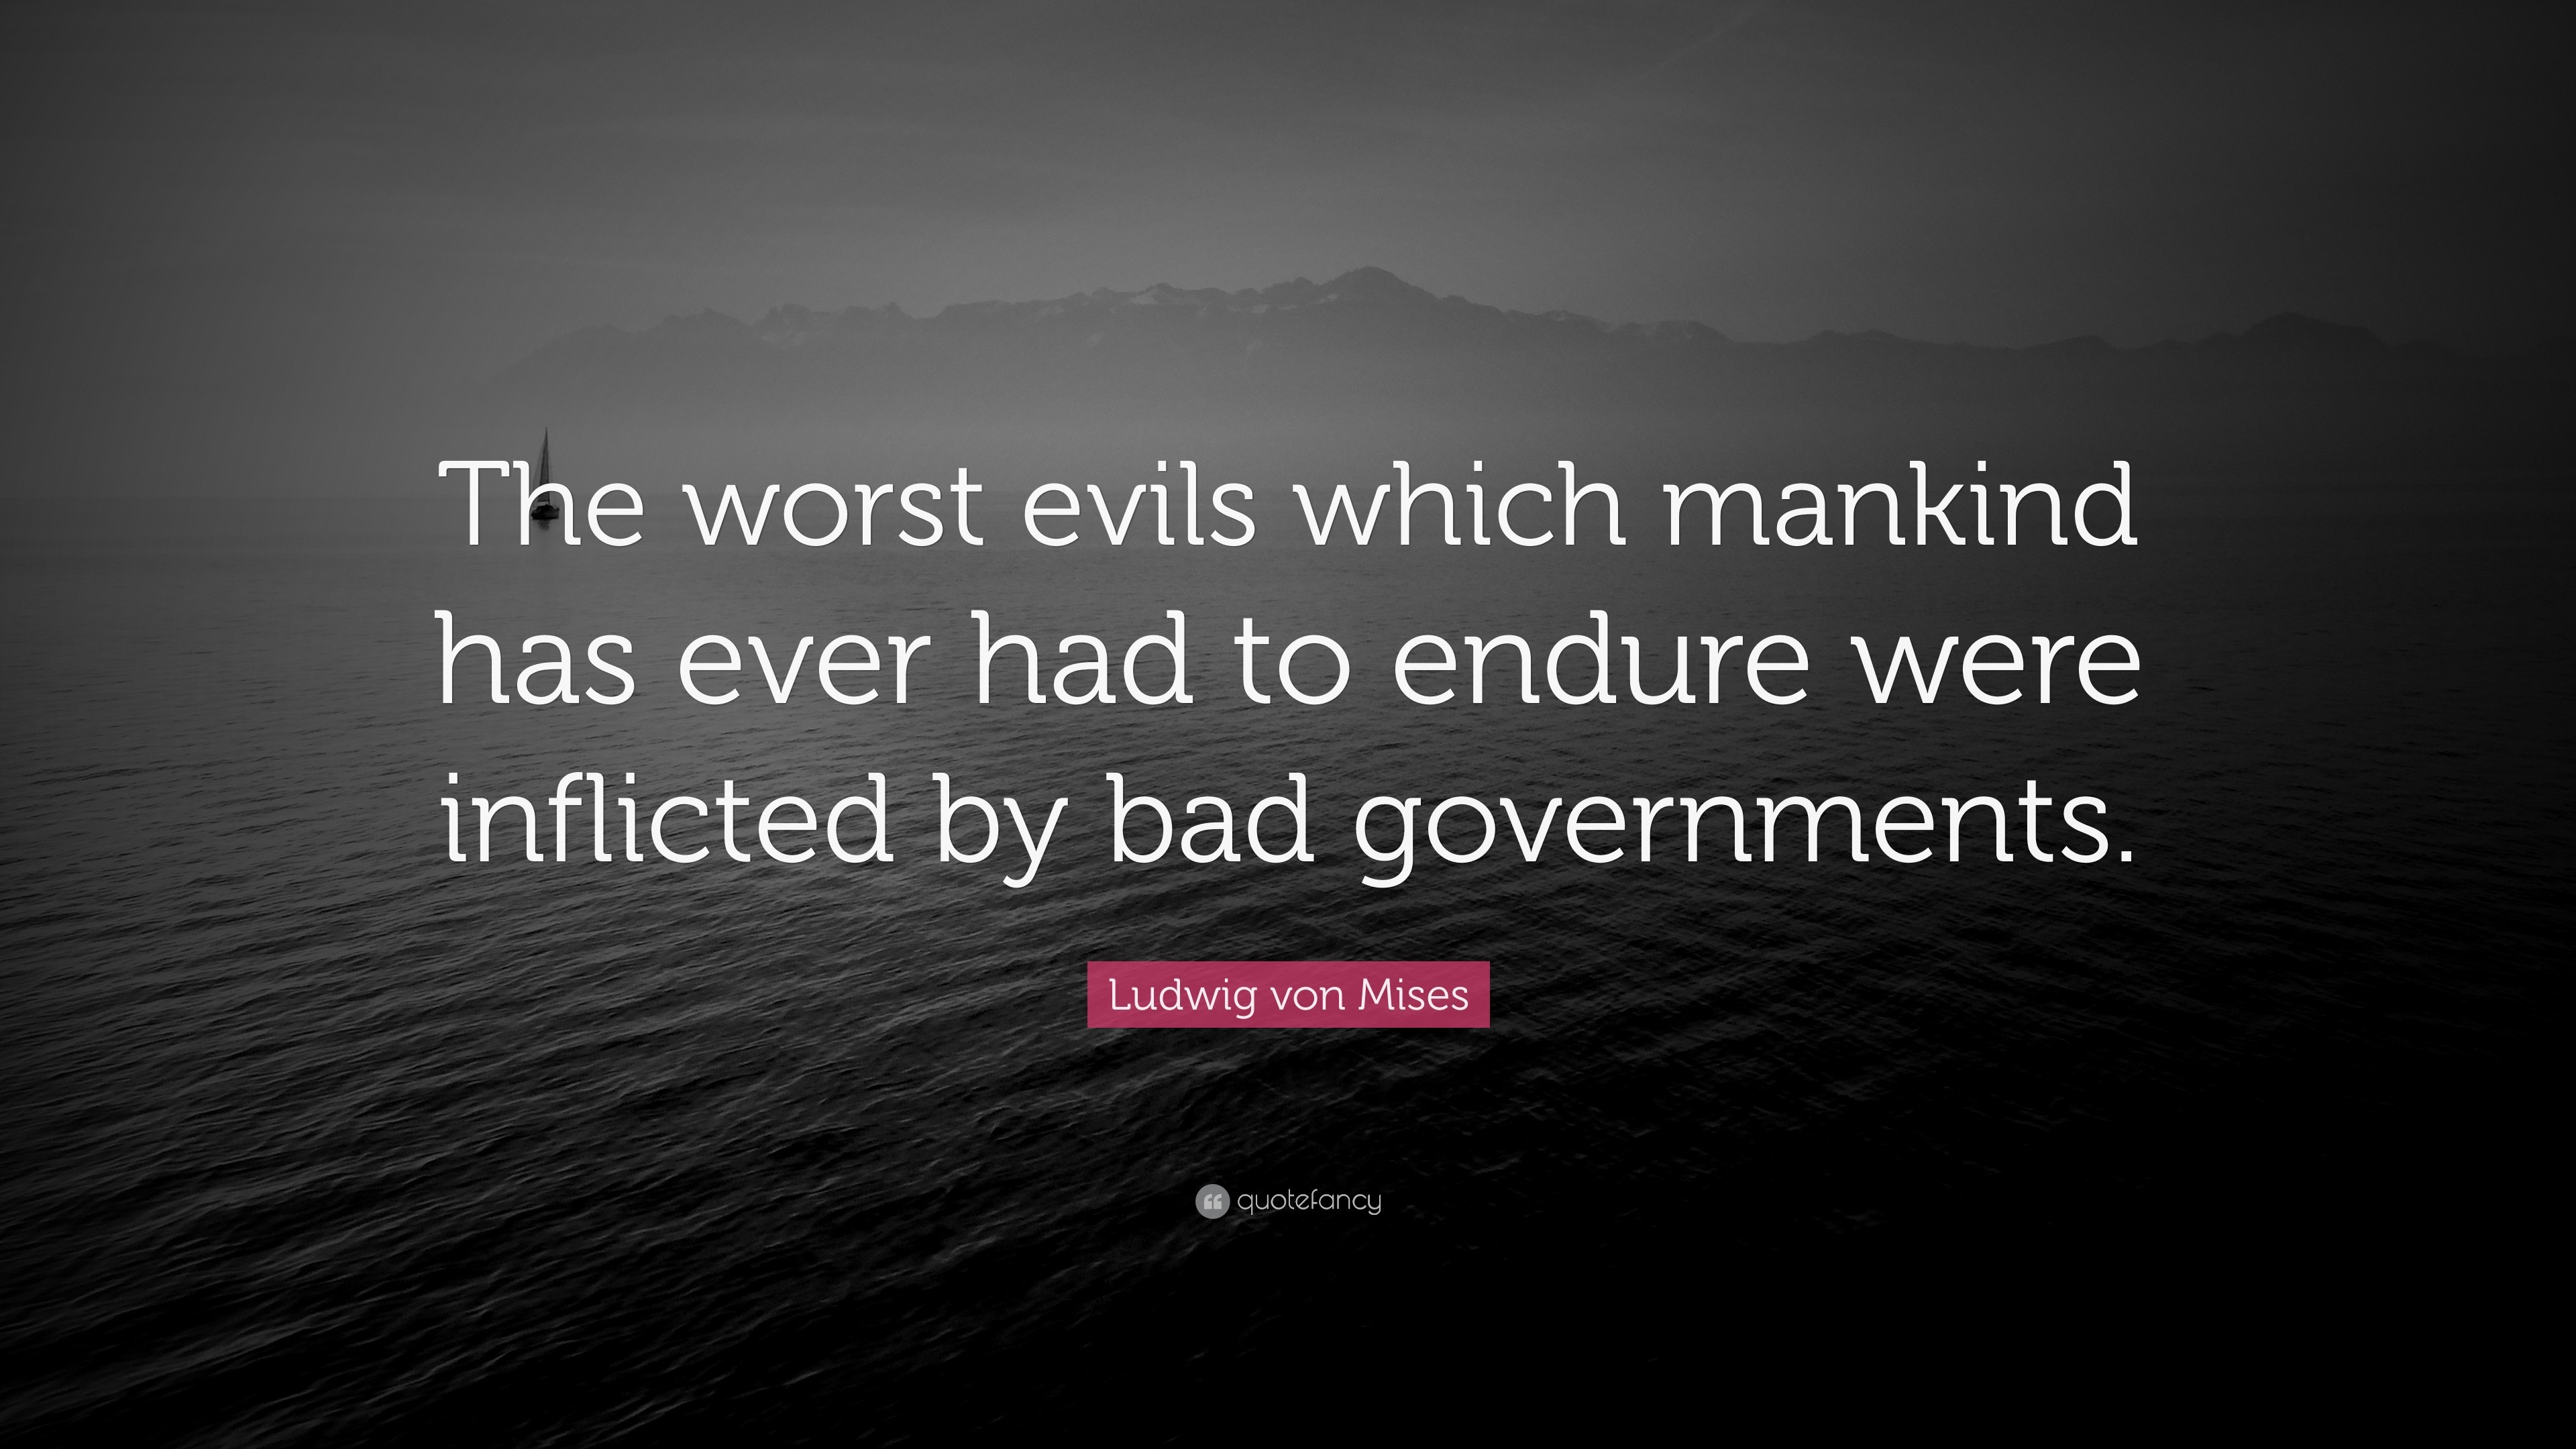 3840x2160 Ludwig von Mises Quote: “The worst evils which mankind has ever had to  endure